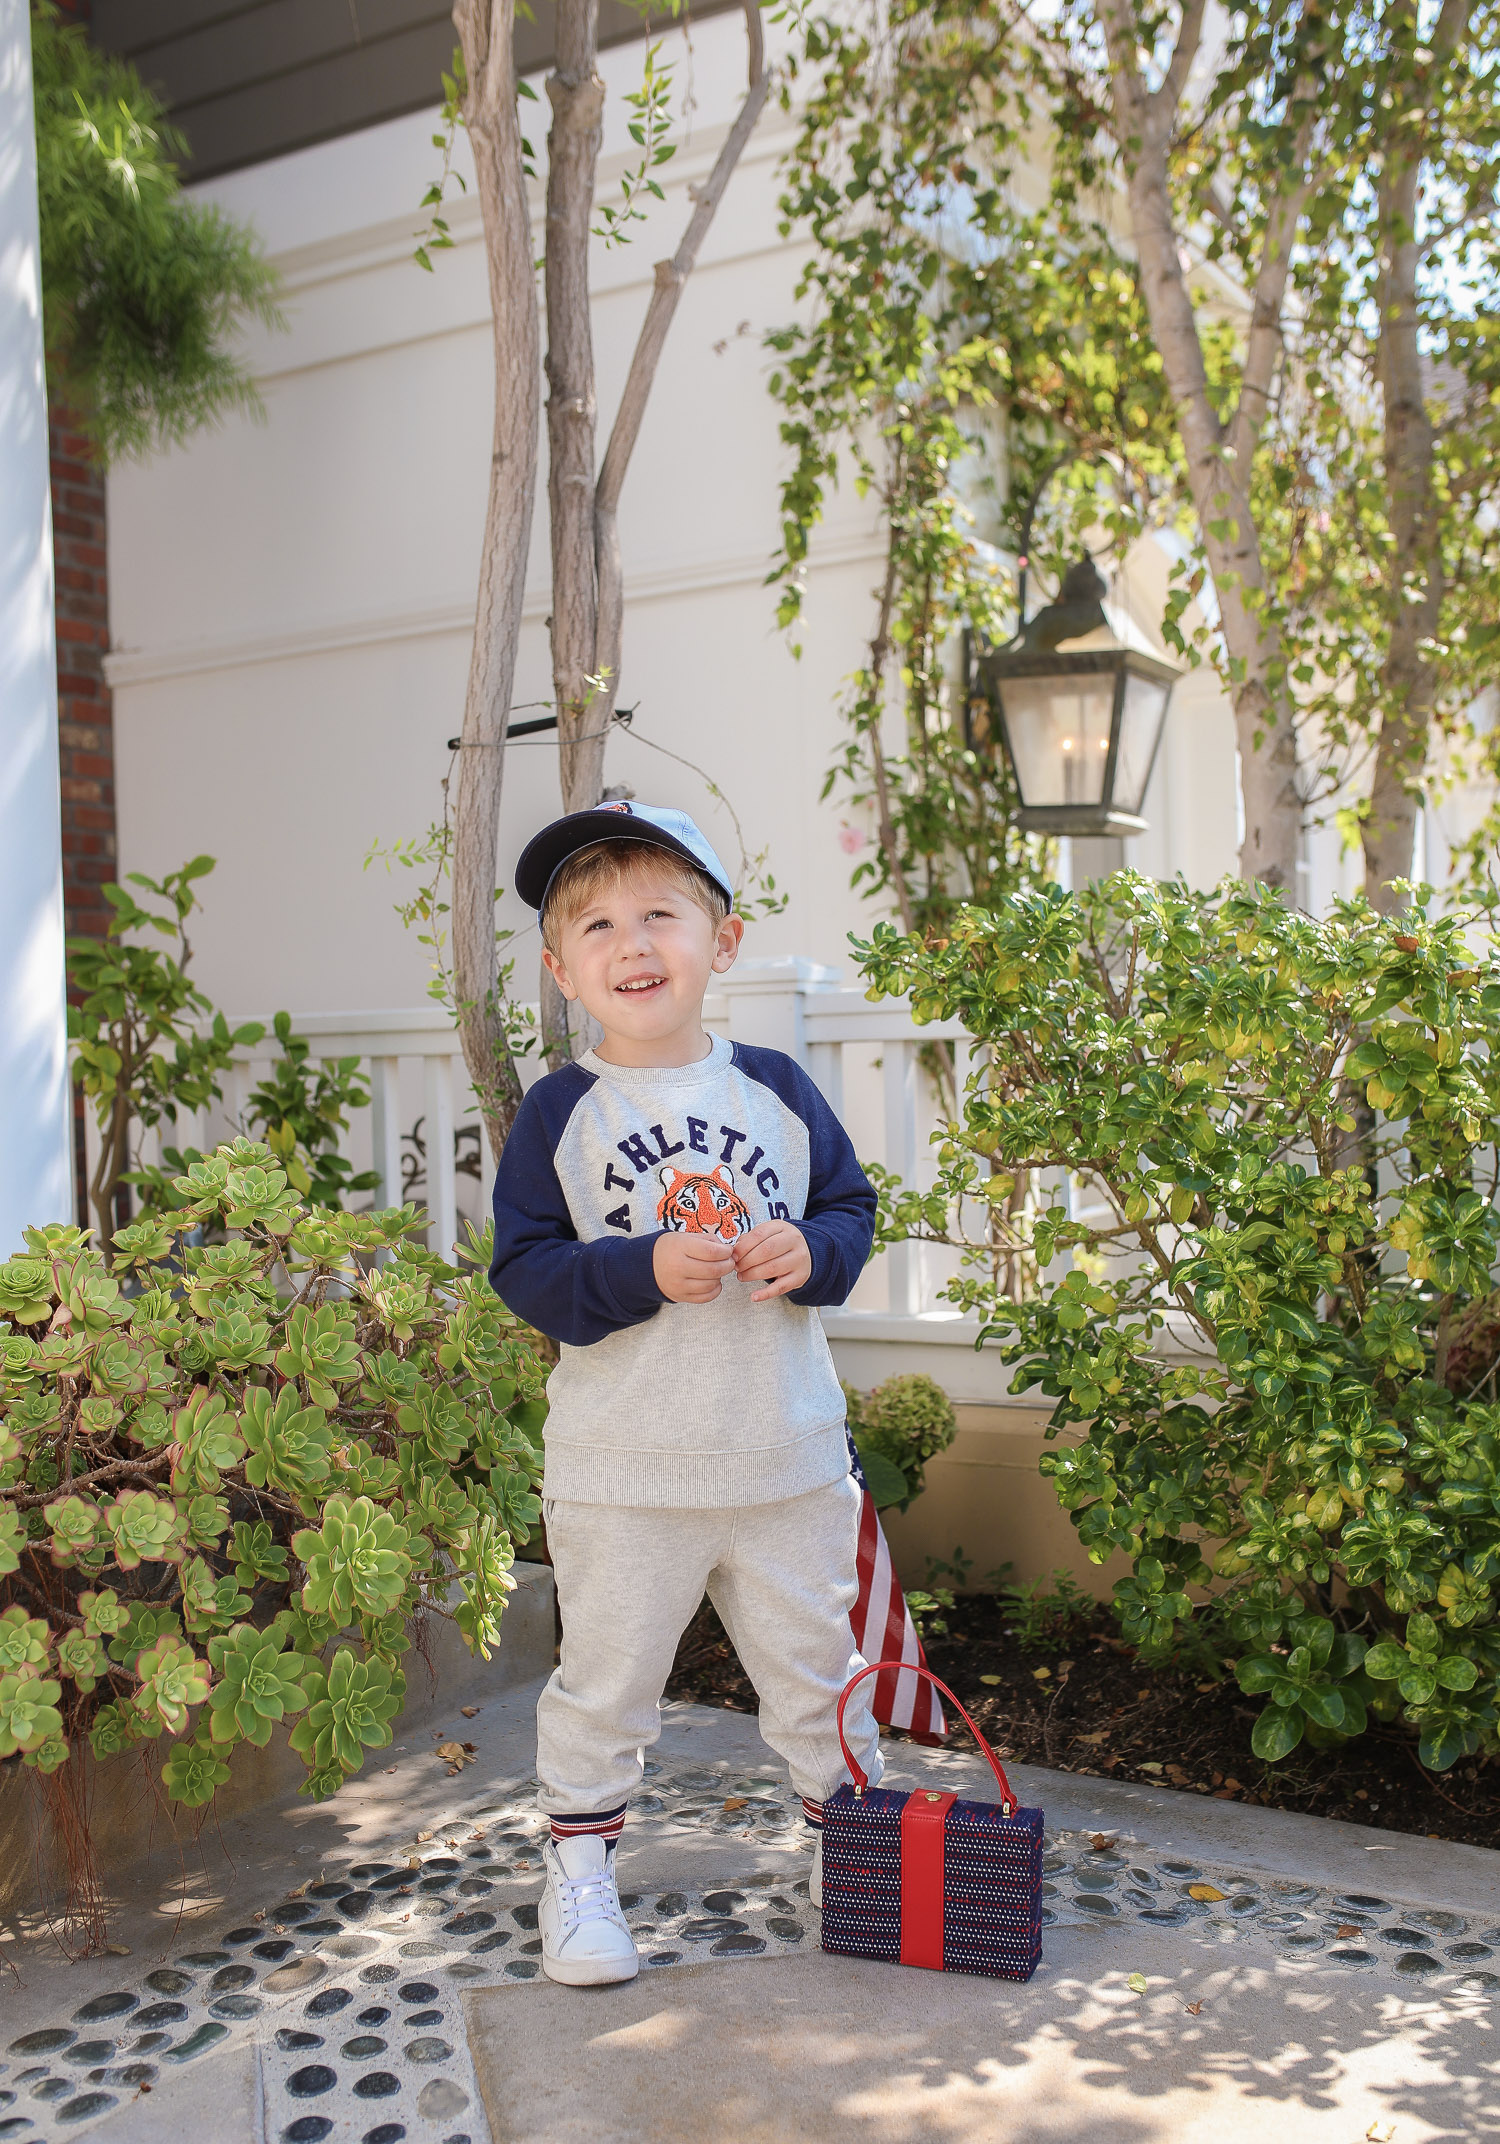 Janie and Jack by popular US fashion Blog, The Sweetest Thing: image of a young boy sitting outside on the ground in Newport Beach, CA and wearing a Janie and Jack TIGER PATCH CAP, Janie and Jack RAGLAN TIGER SWEATSHIRT, Janie and Jack STRIPE TRIM JOGGER.